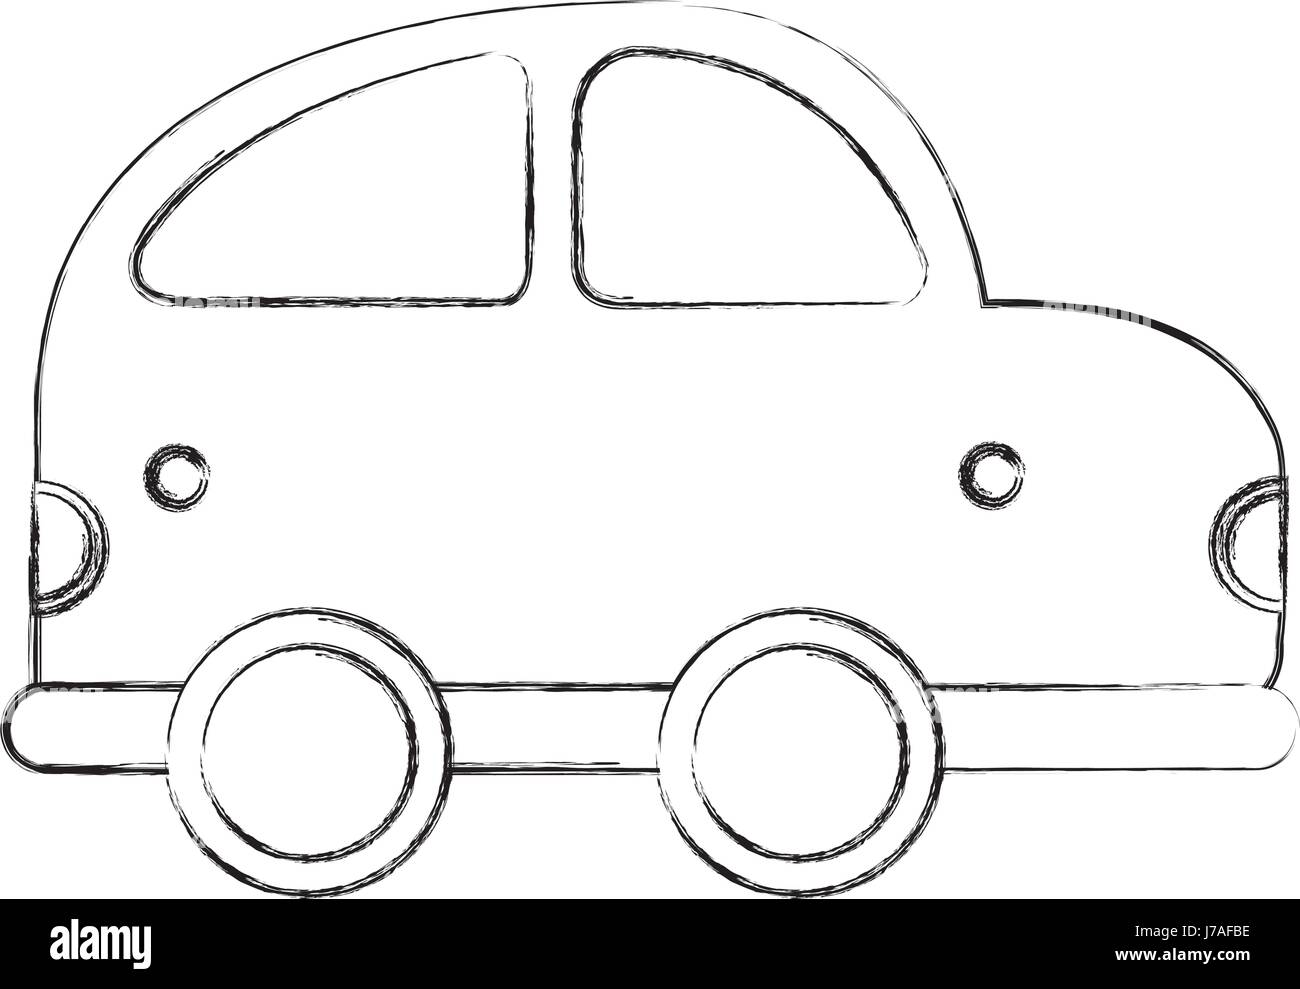 Car Outline Black and White Stock Photos & Images - Alamy